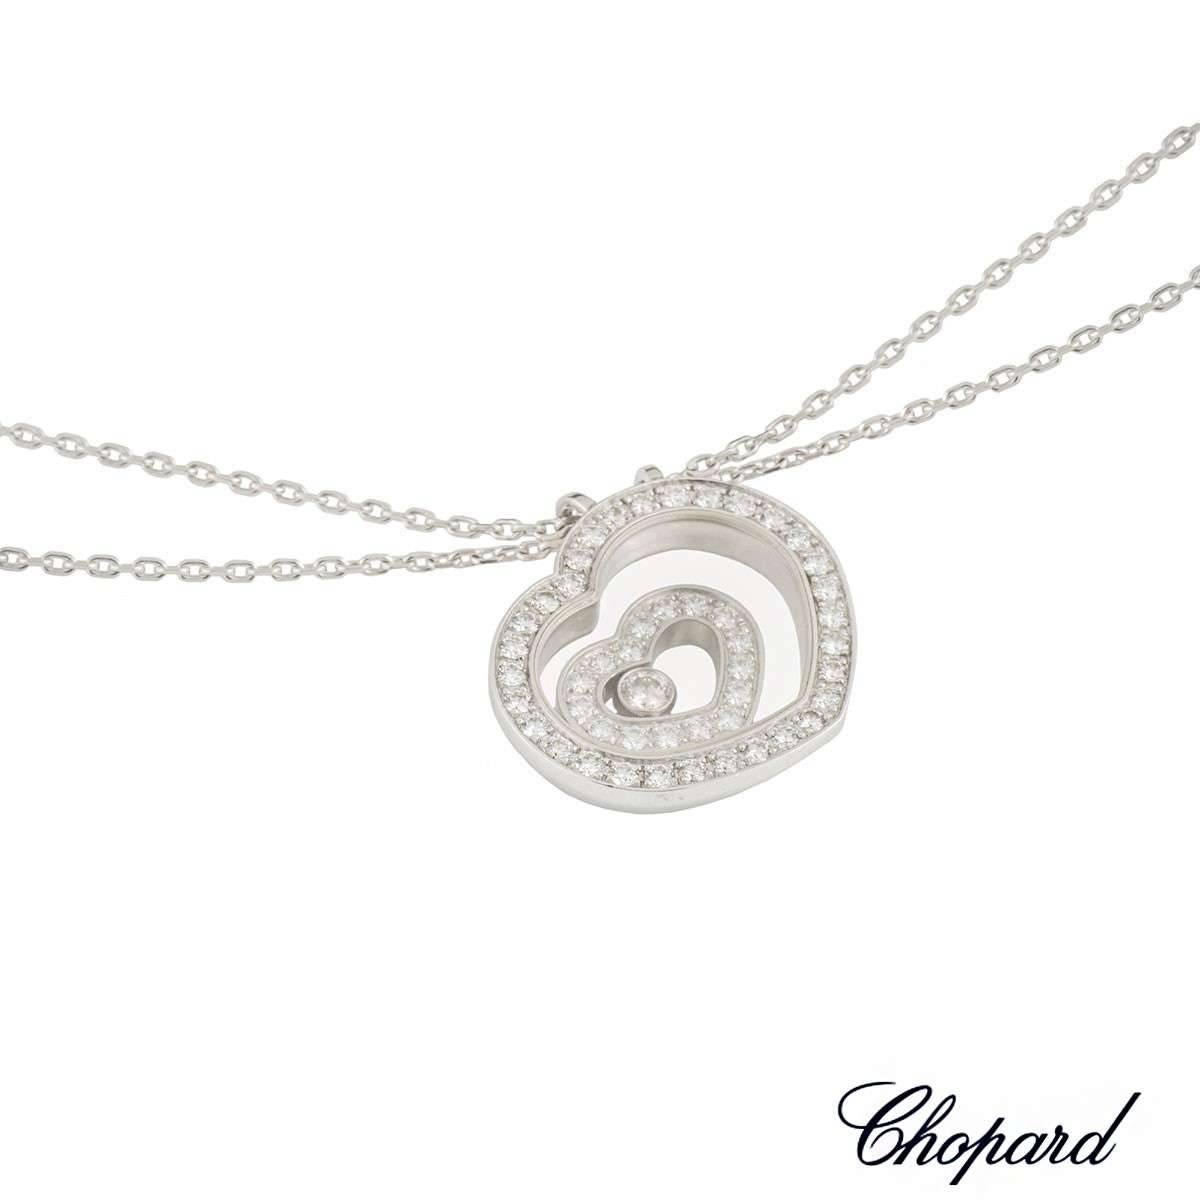 An 18k white gold pendant from the Chopard Happy Spirit collection. The pendant is composed of a heart shape pendant, set to the centre with a freely moving smaller heart, each pave set with round brilliant cut diamonds, totalling 0.47ct, colour G